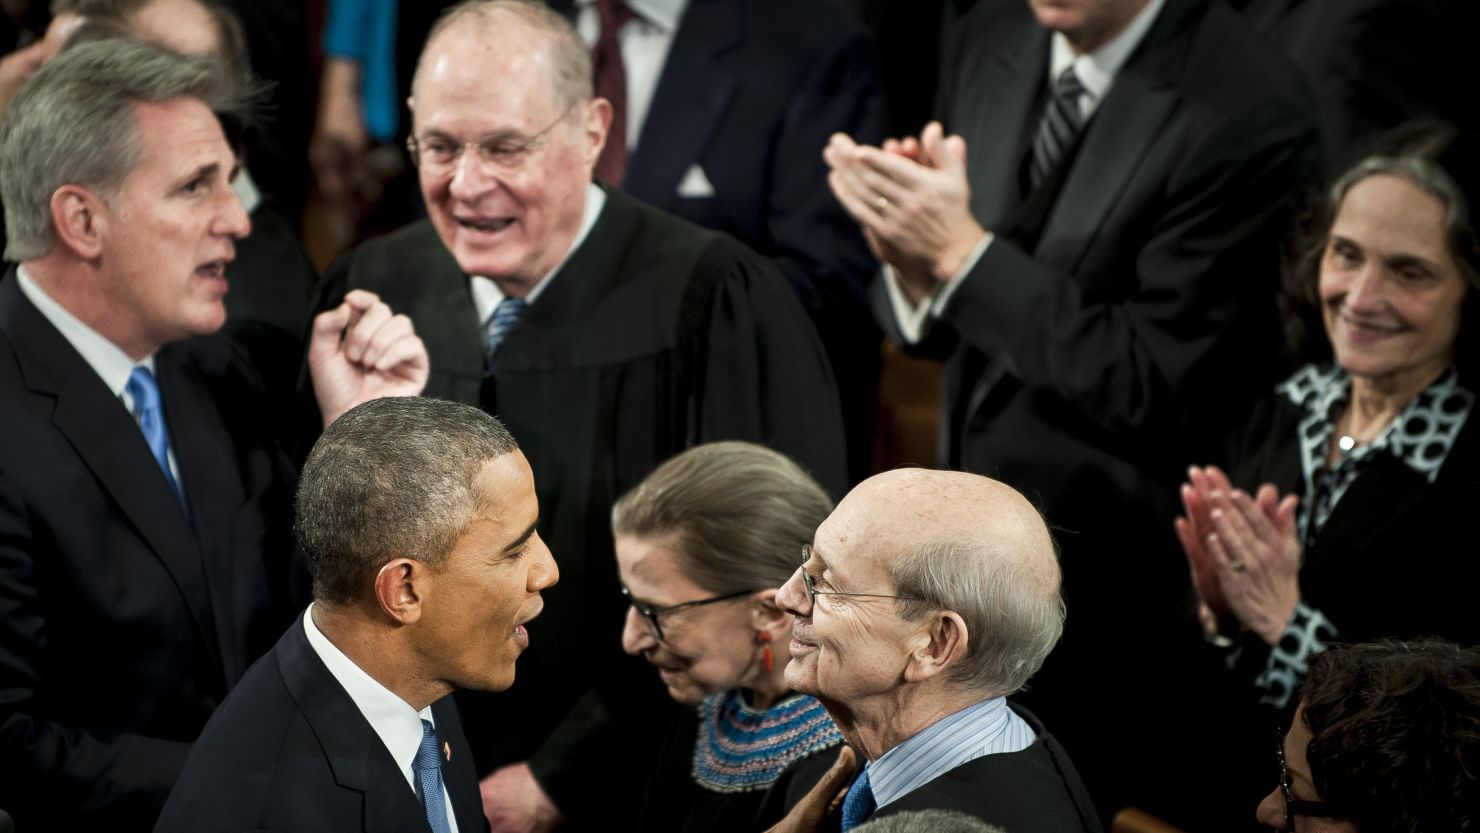 U.S. President Barack Obama, center left, speaks with Supreme Court Justice Stephen Breyer, center right, as he enters the House Chamber to deliver the State of the Union address to a joint session of Congress at the Capitol in Washington, U.S., on Tuesday, Jan. 20, 2015.